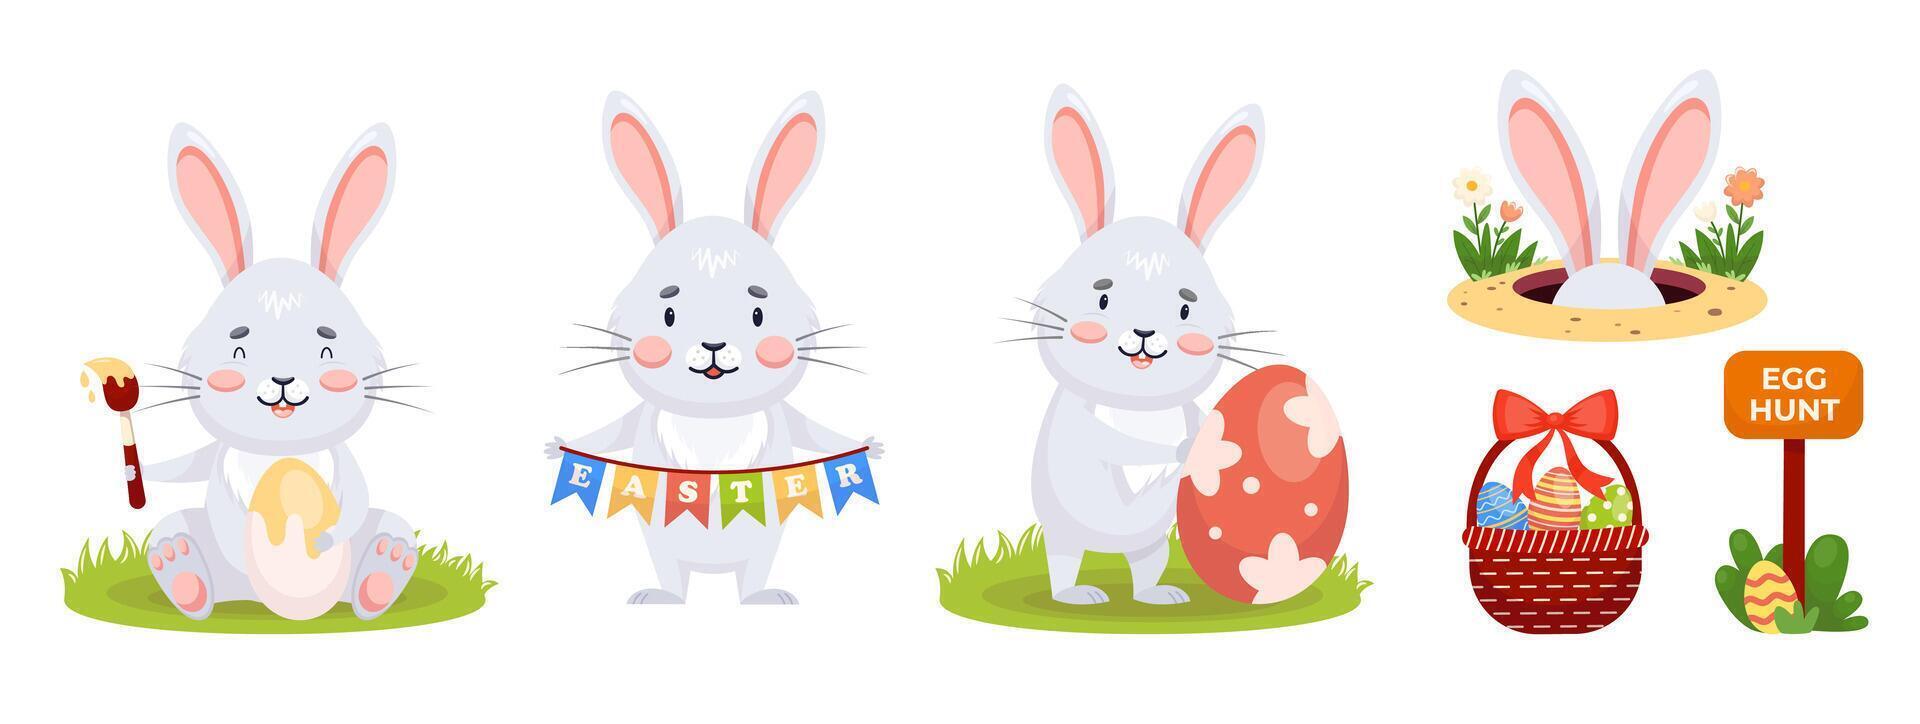 Easter rabbits decorating eggs on meadow of set vector